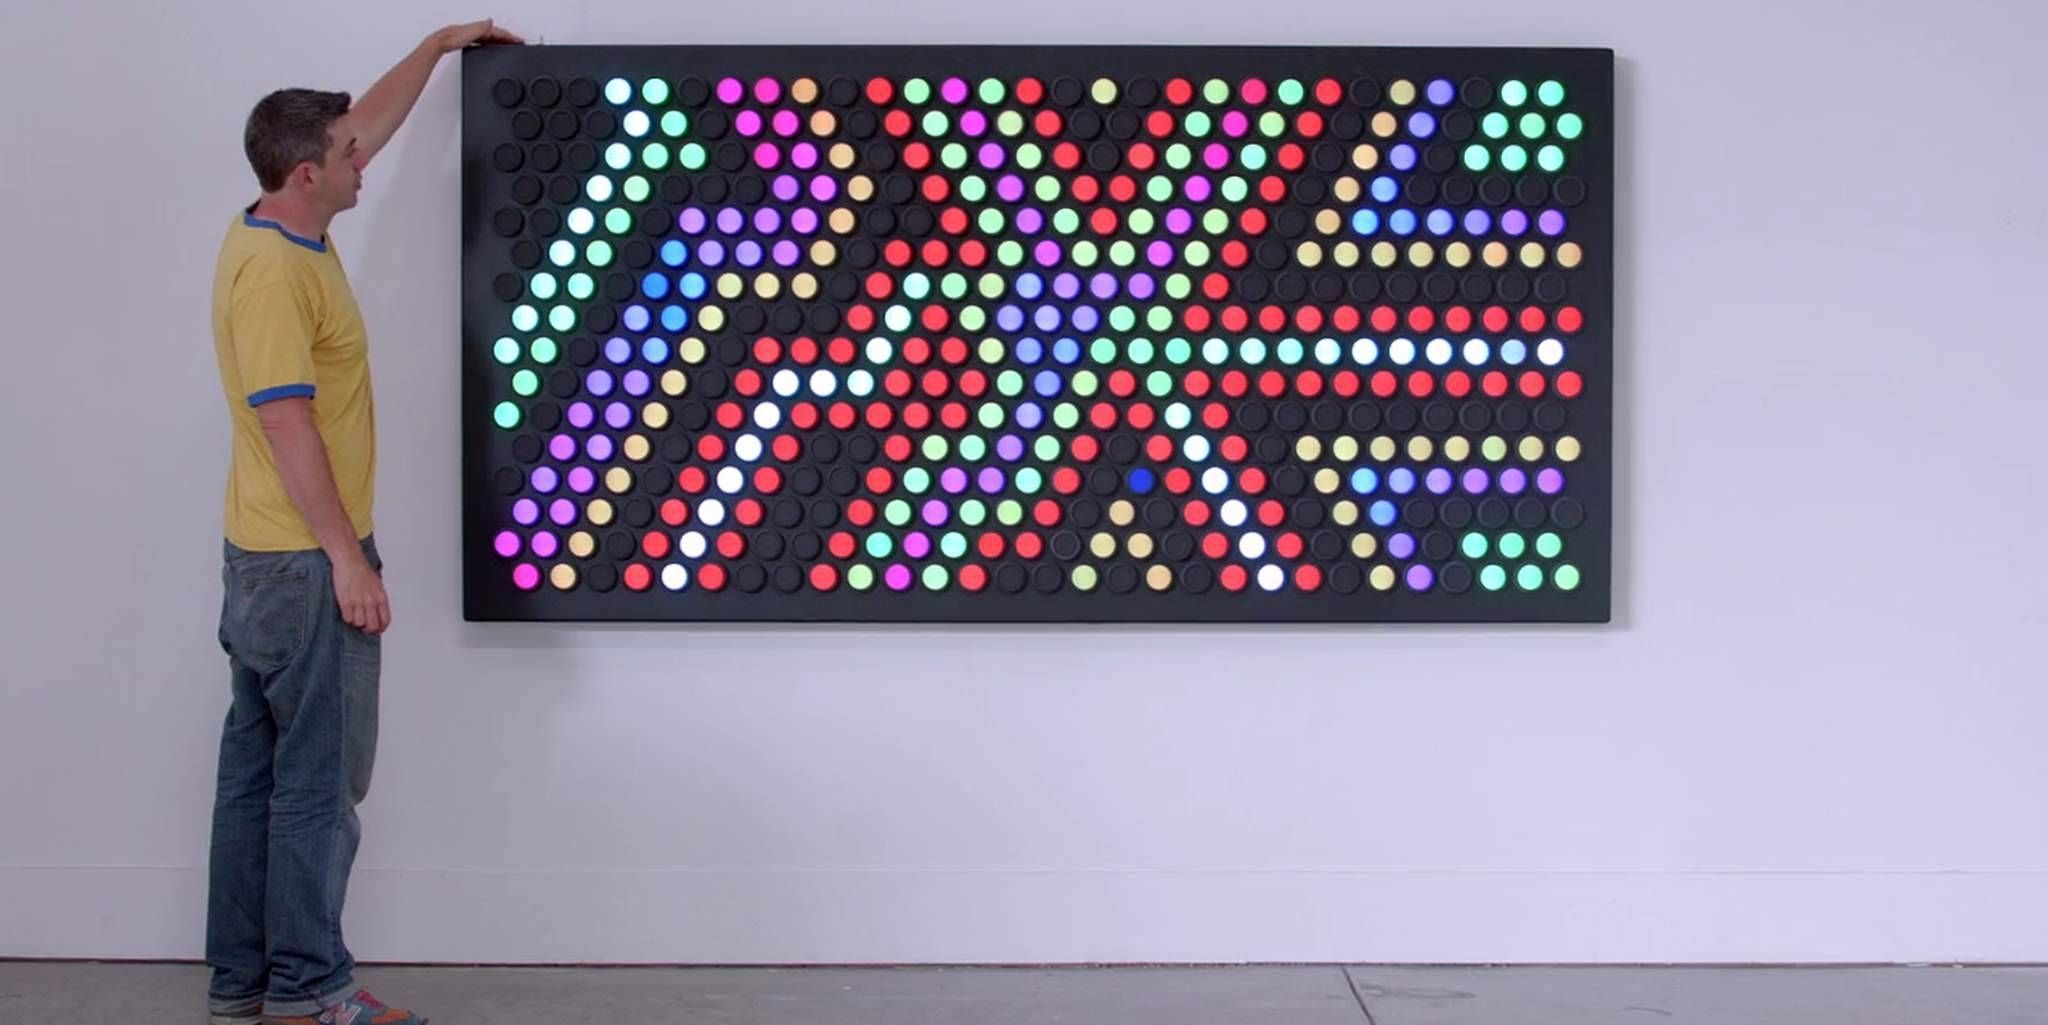 Your Inner Child Will Love This Giant Lite Brite Wall | The Daily Dot With Most Current Electronic Wall Art (View 6 of 25)